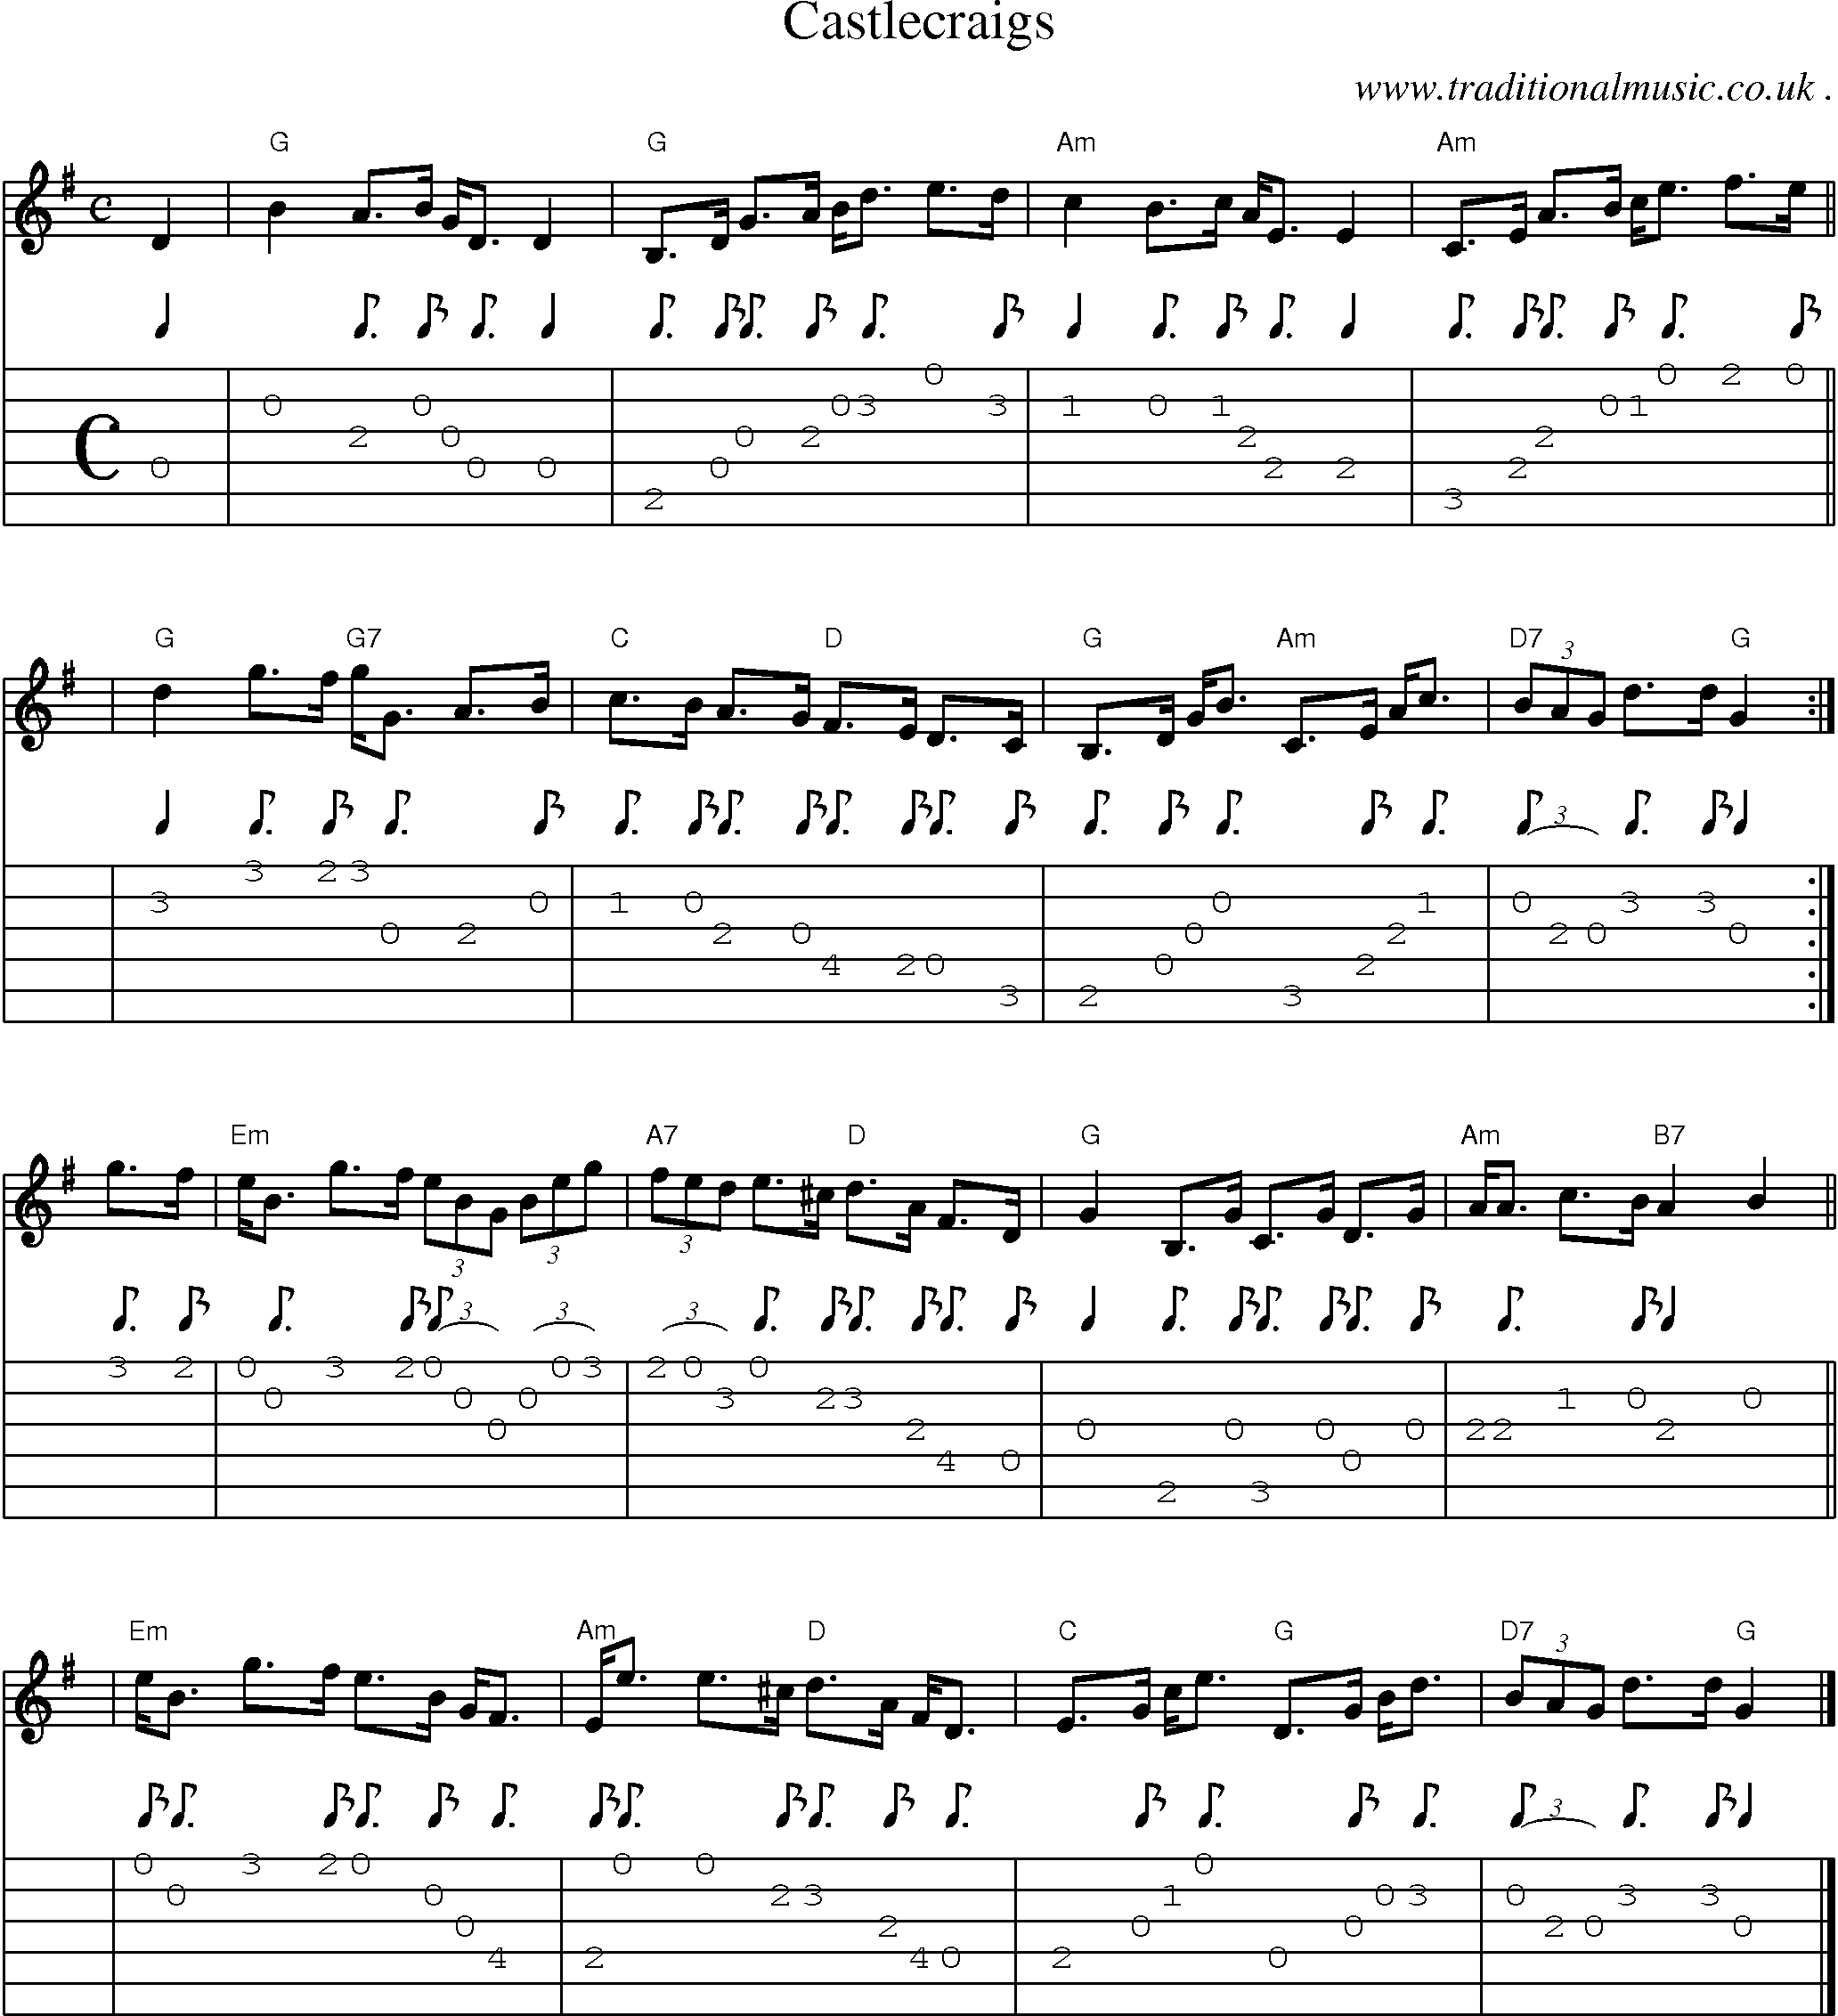 Sheet-music  score, Chords and Guitar Tabs for Castlecraigs